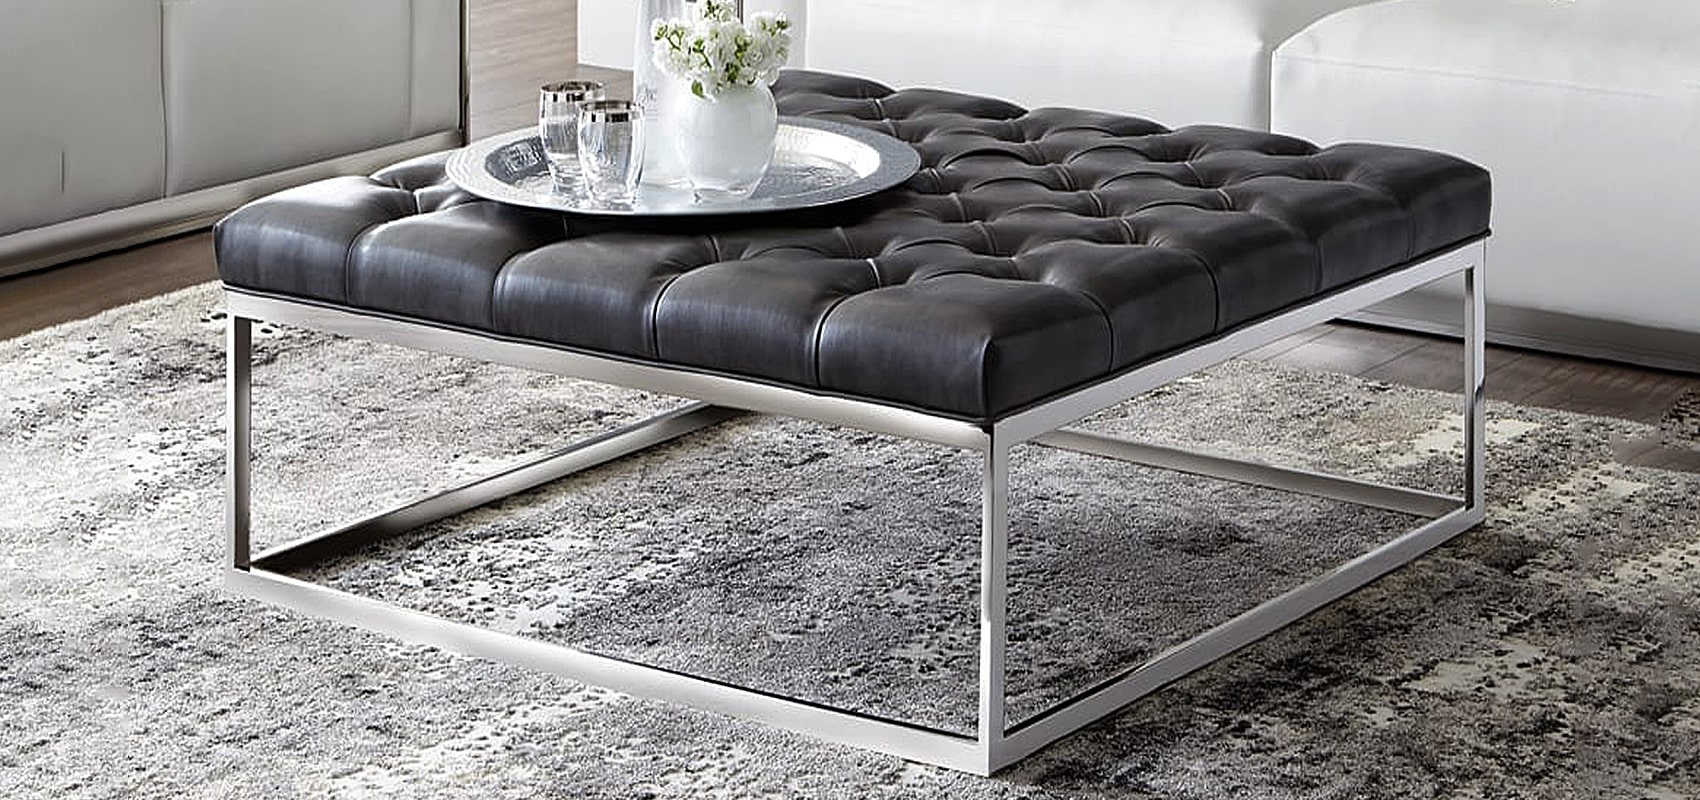 Large Square Ottoman Coffee Table